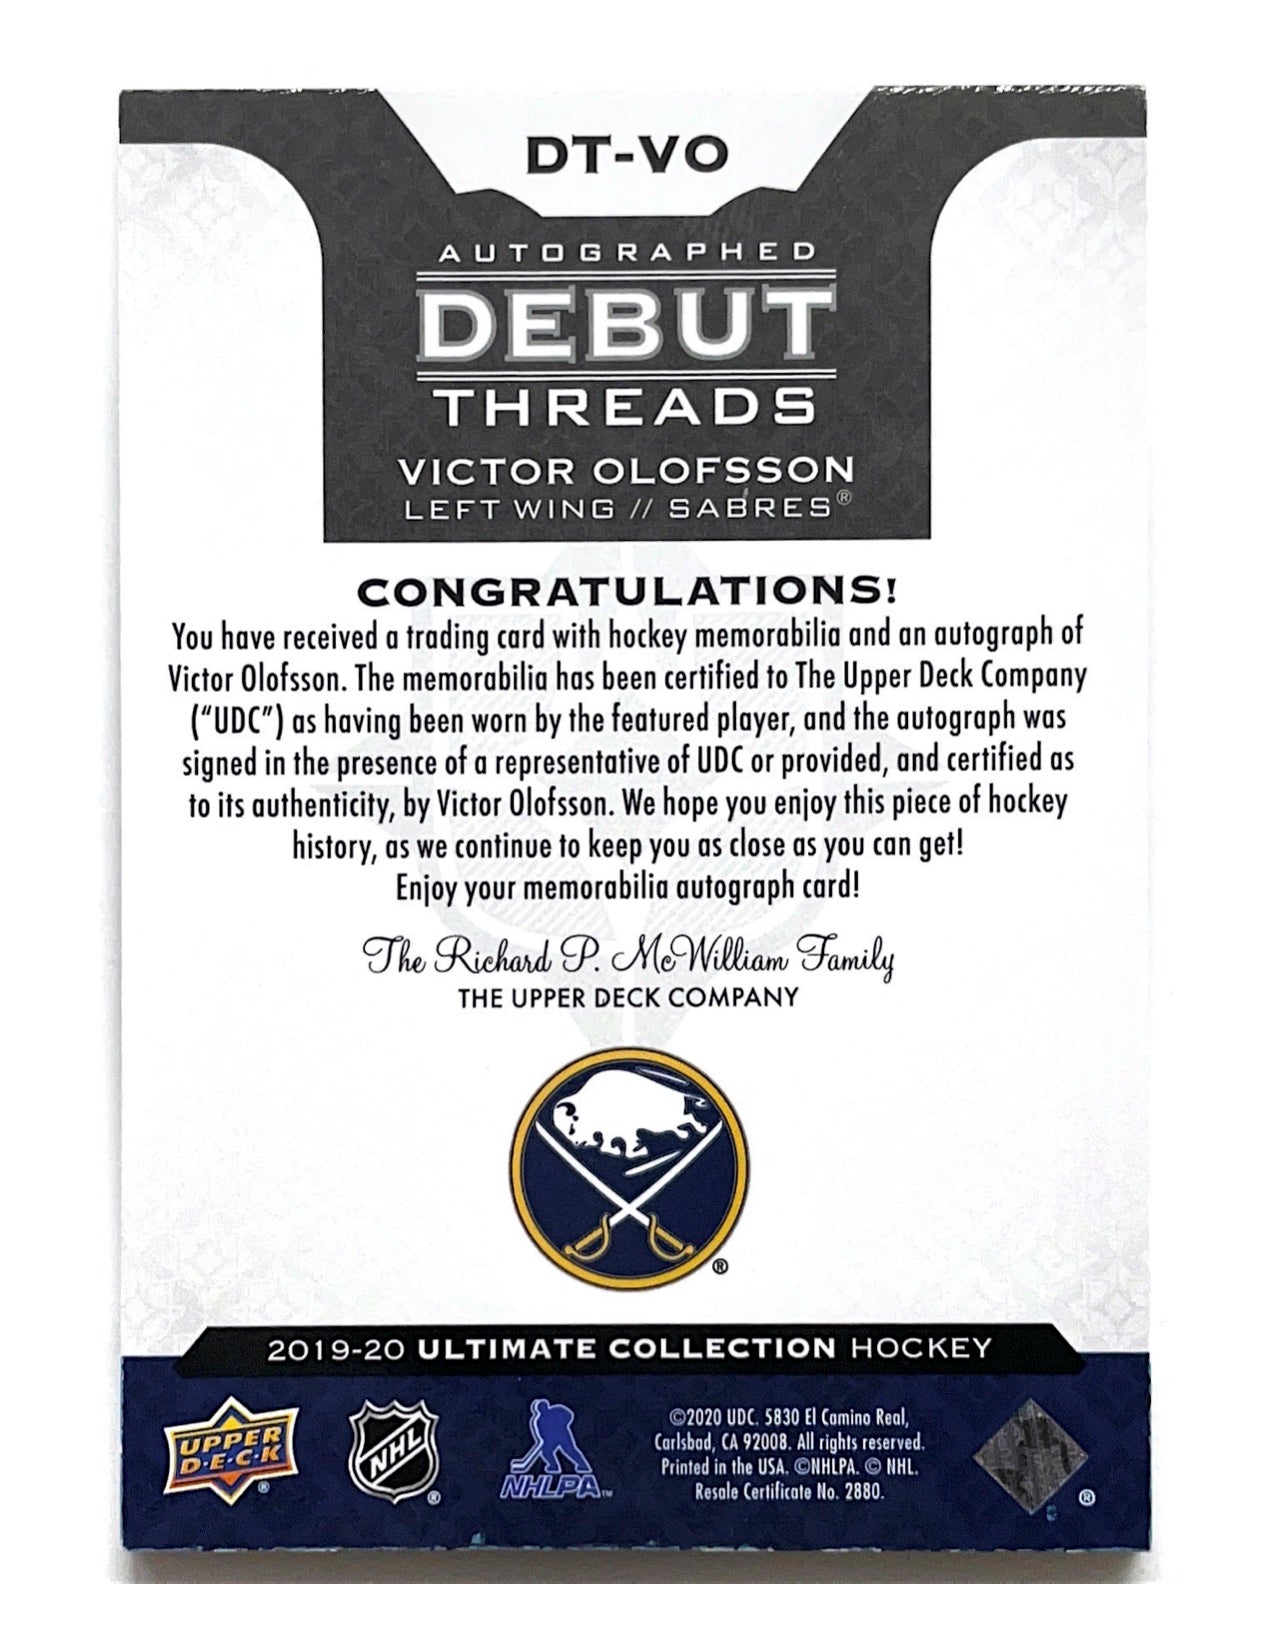 Victor Olofsson 2020-21 Upper Deck Ultimate Collection Autographed Debut Threads Update #DT-VO - 36/49